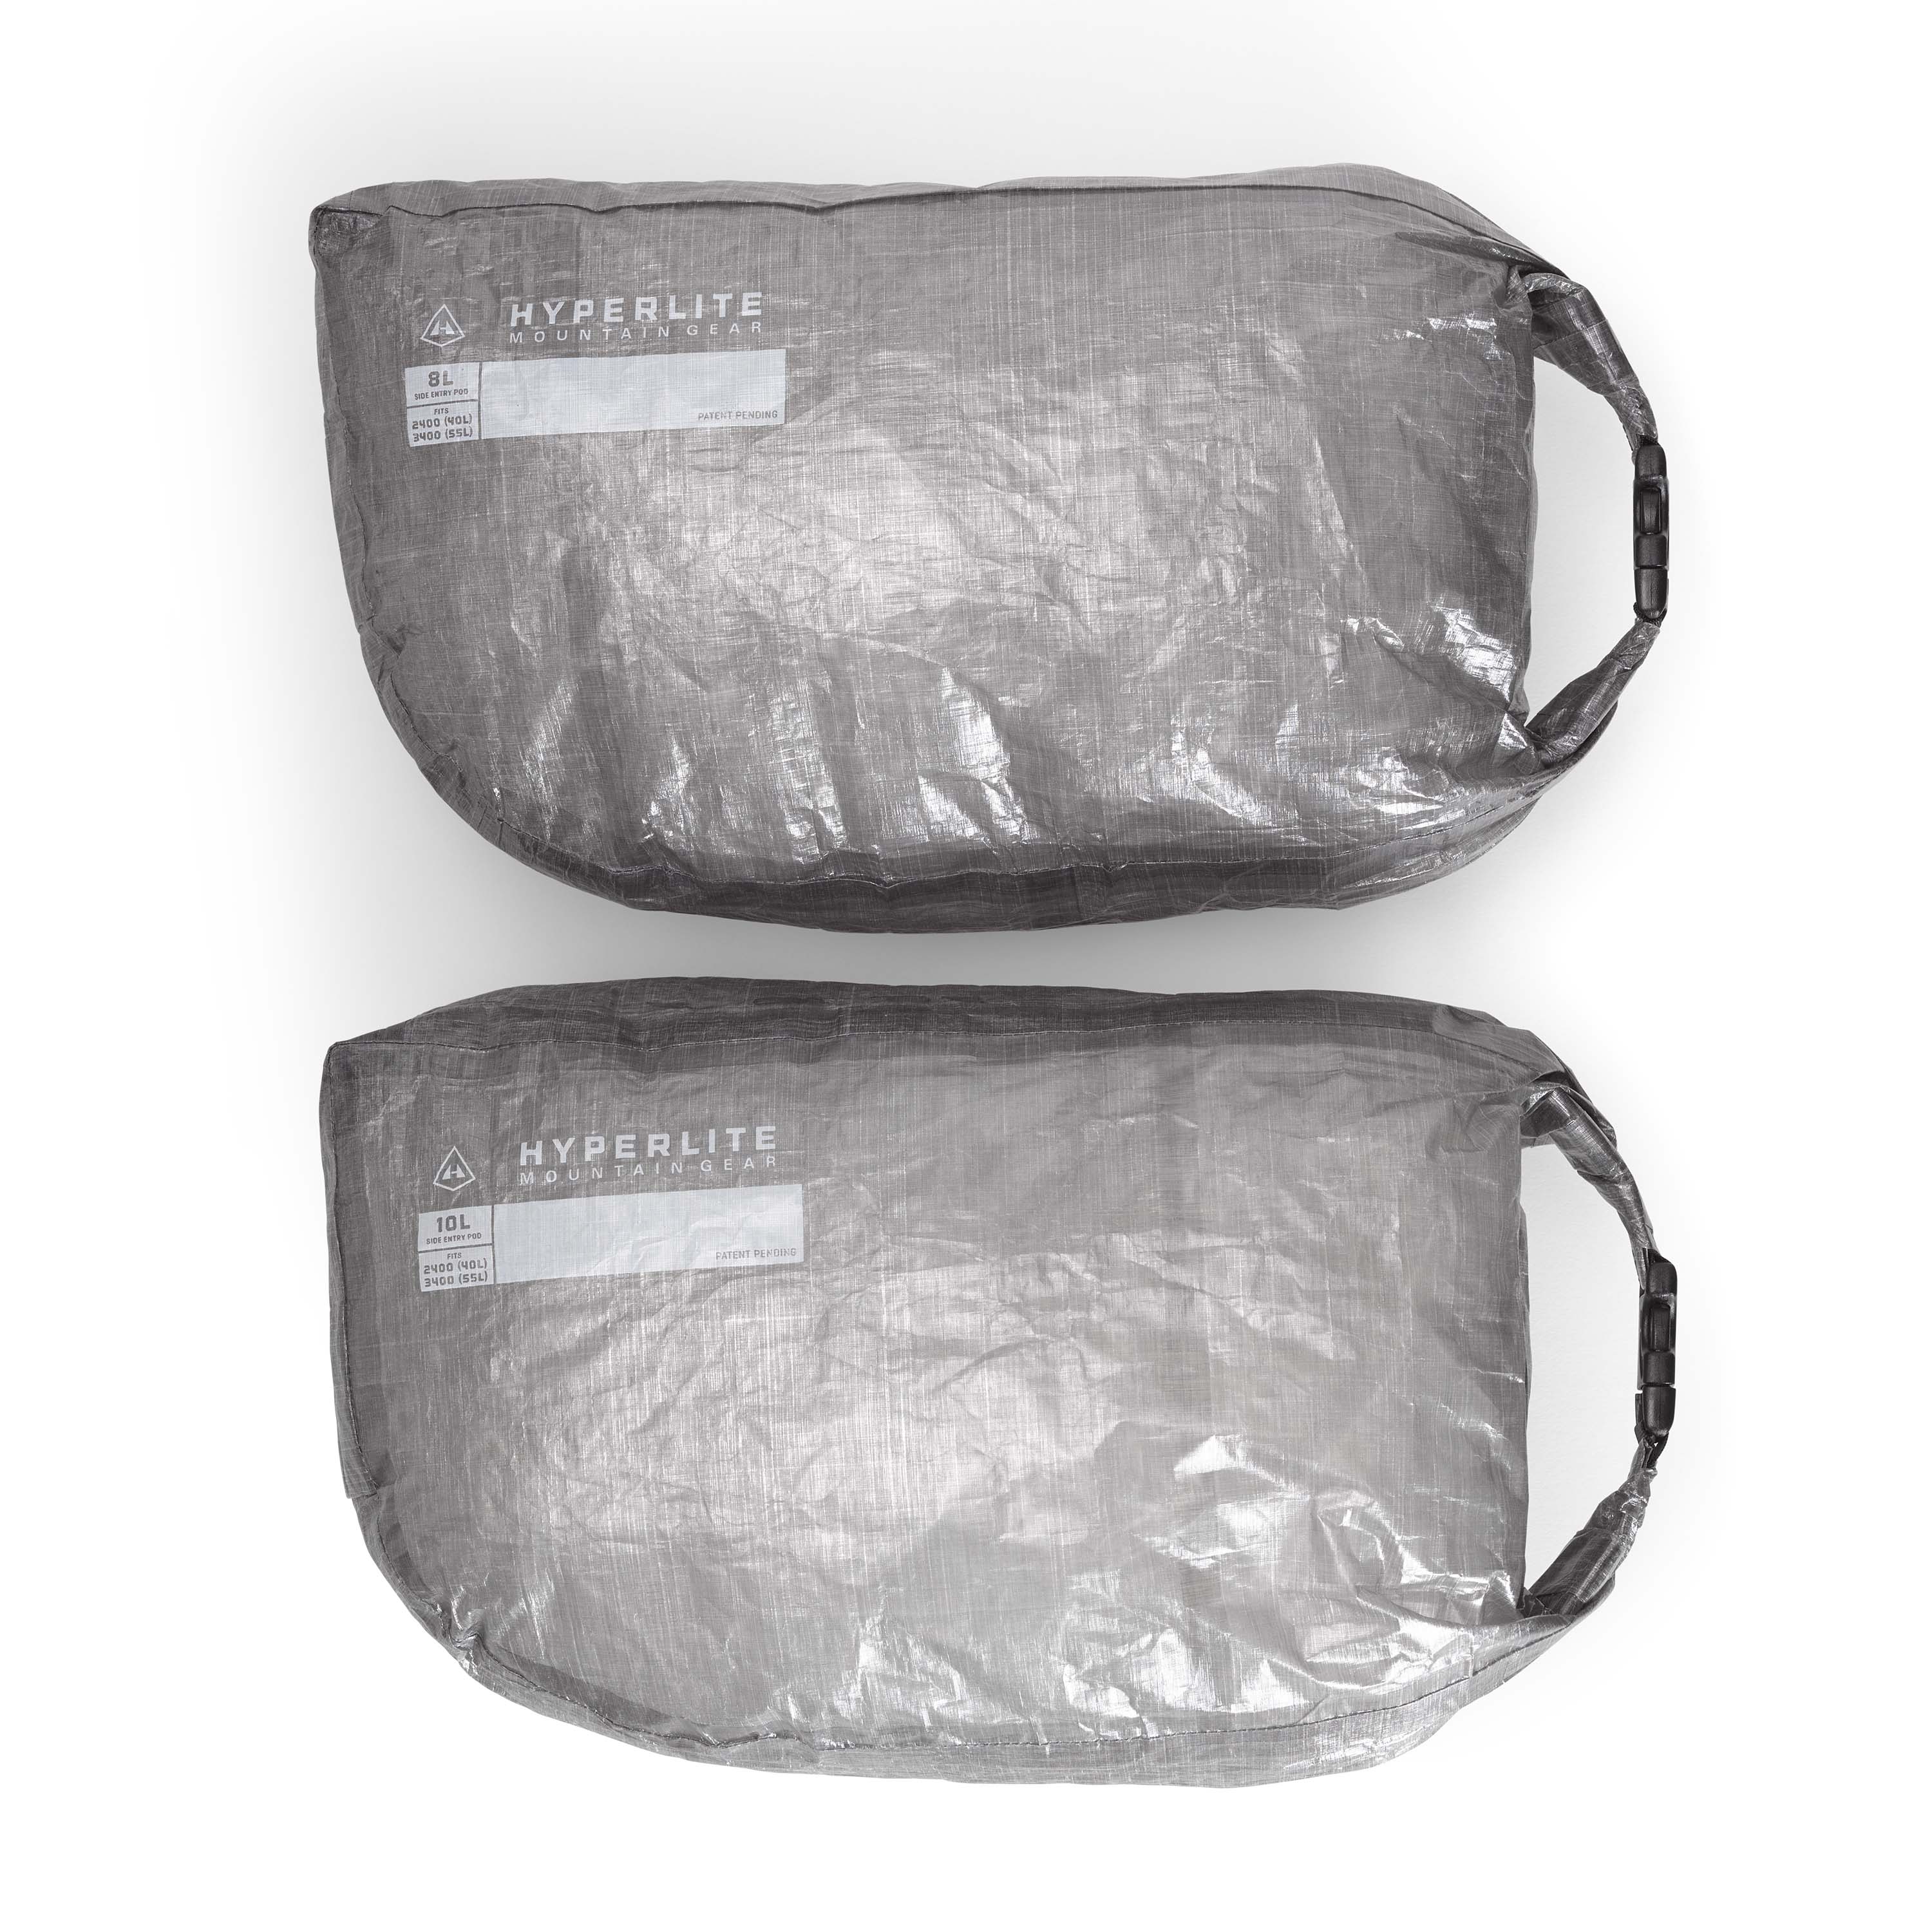 Two grey plastic bags on a white surface.